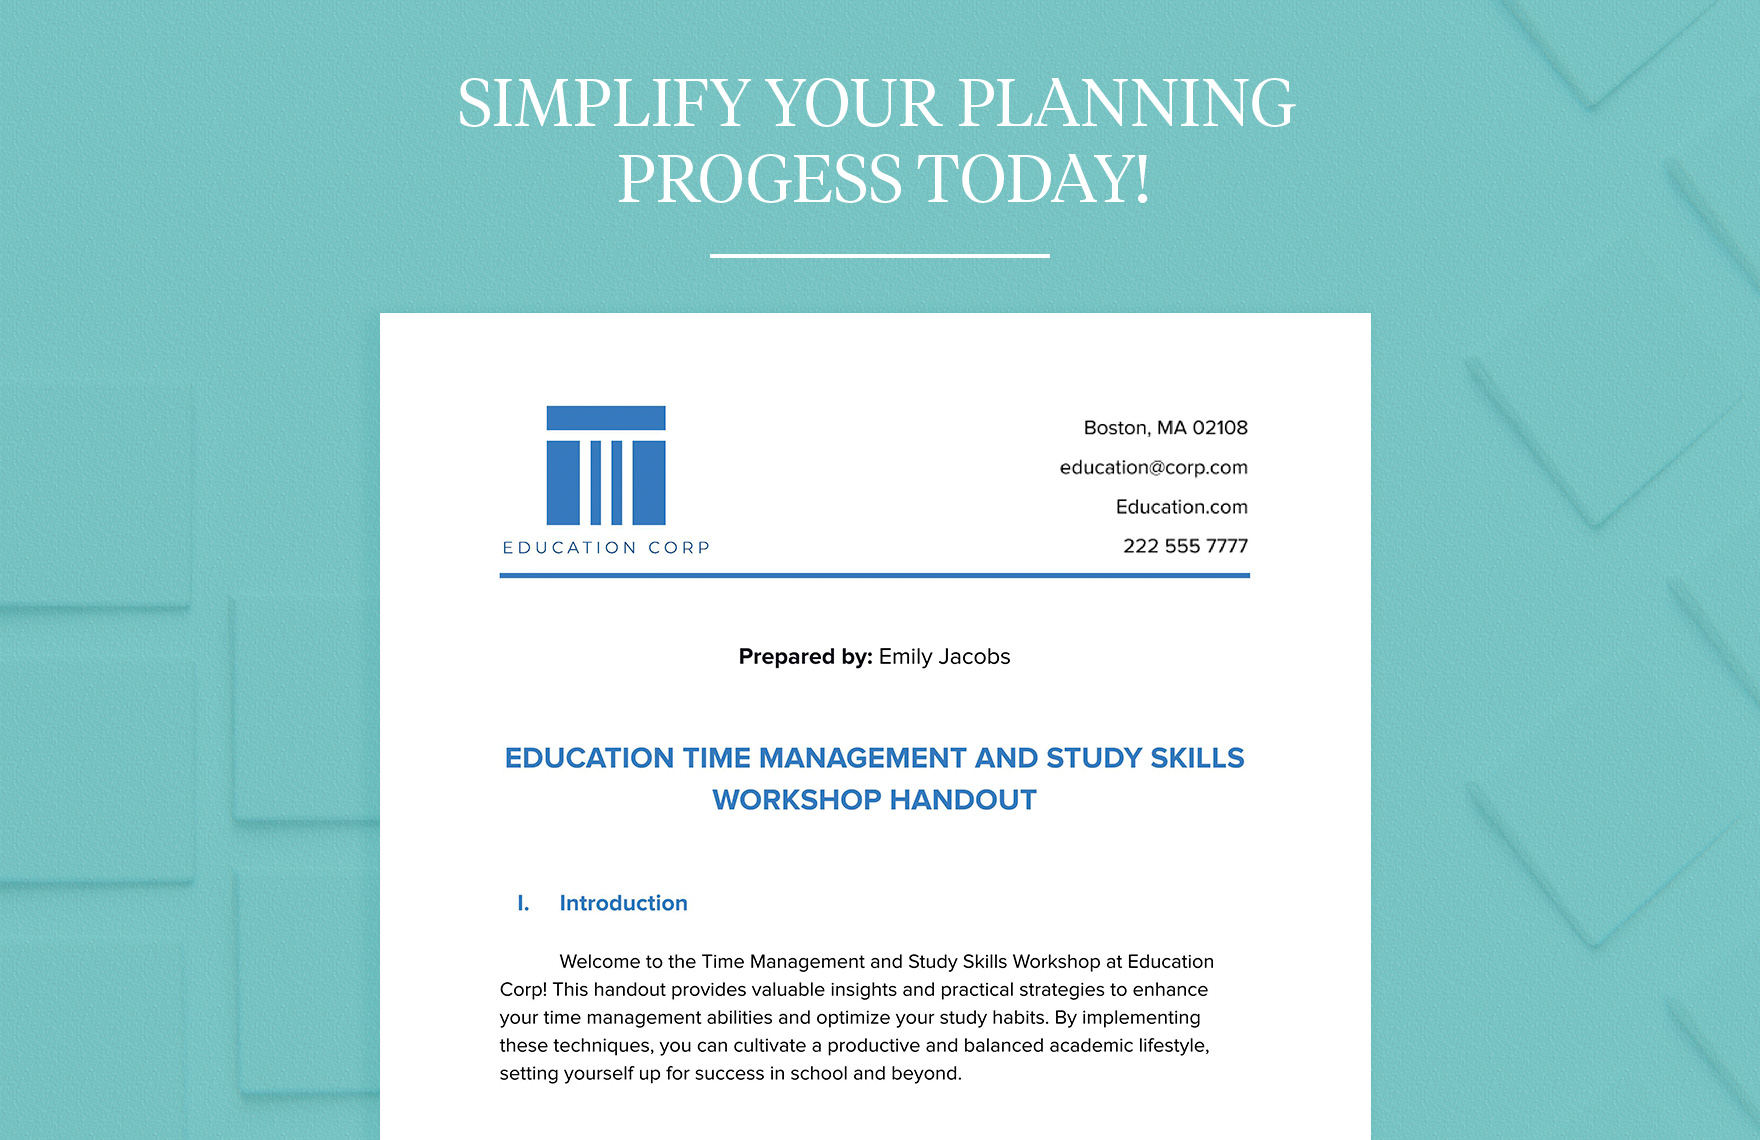 Education Time Management and Study Skills Workshop Handout